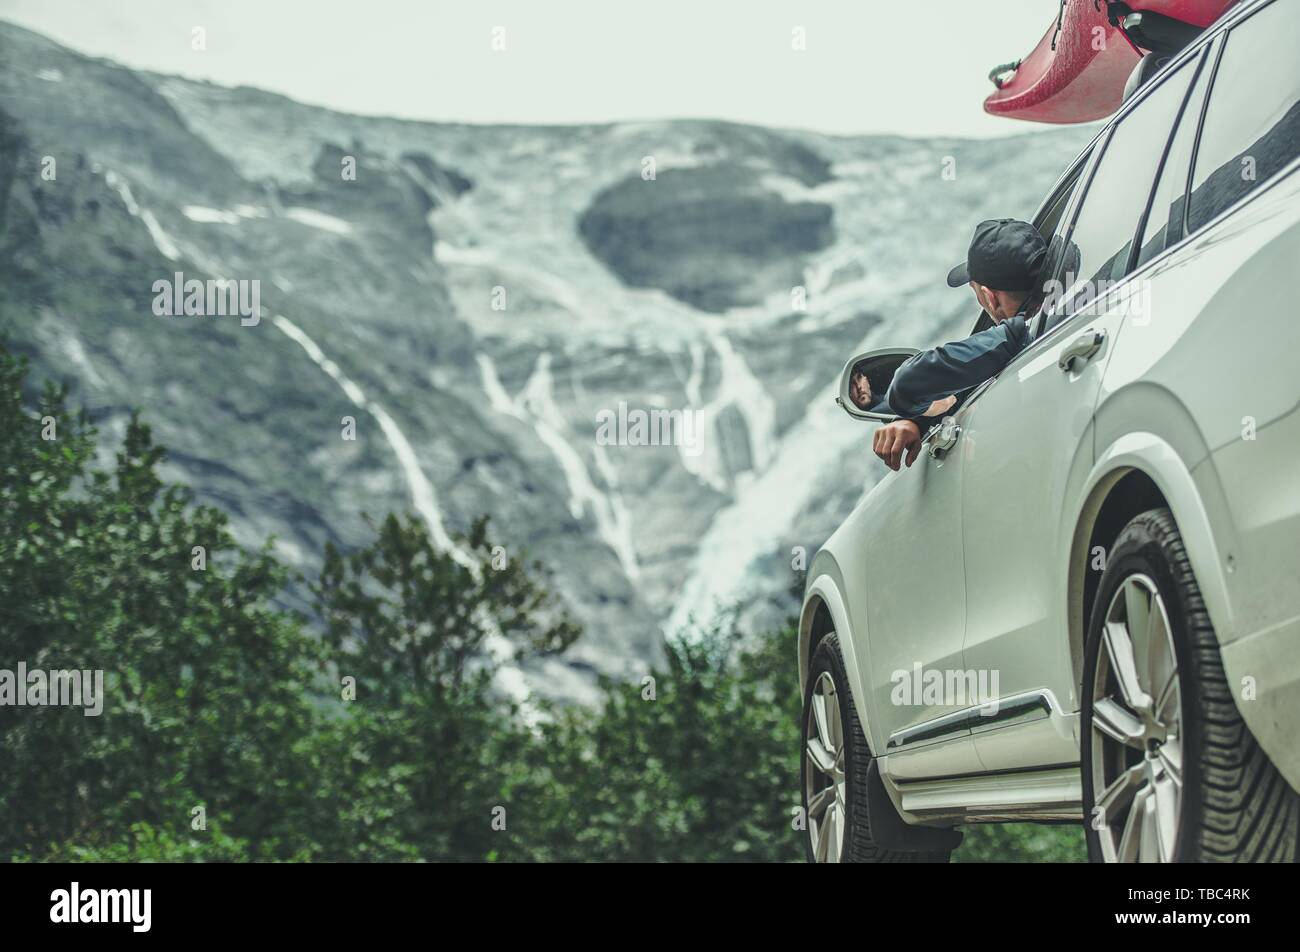 Caucasian Men on a Scenic Mountain Road Trip in the Full Size SUV with Kayak on a Roof. Summer Destinations. Stock Photo